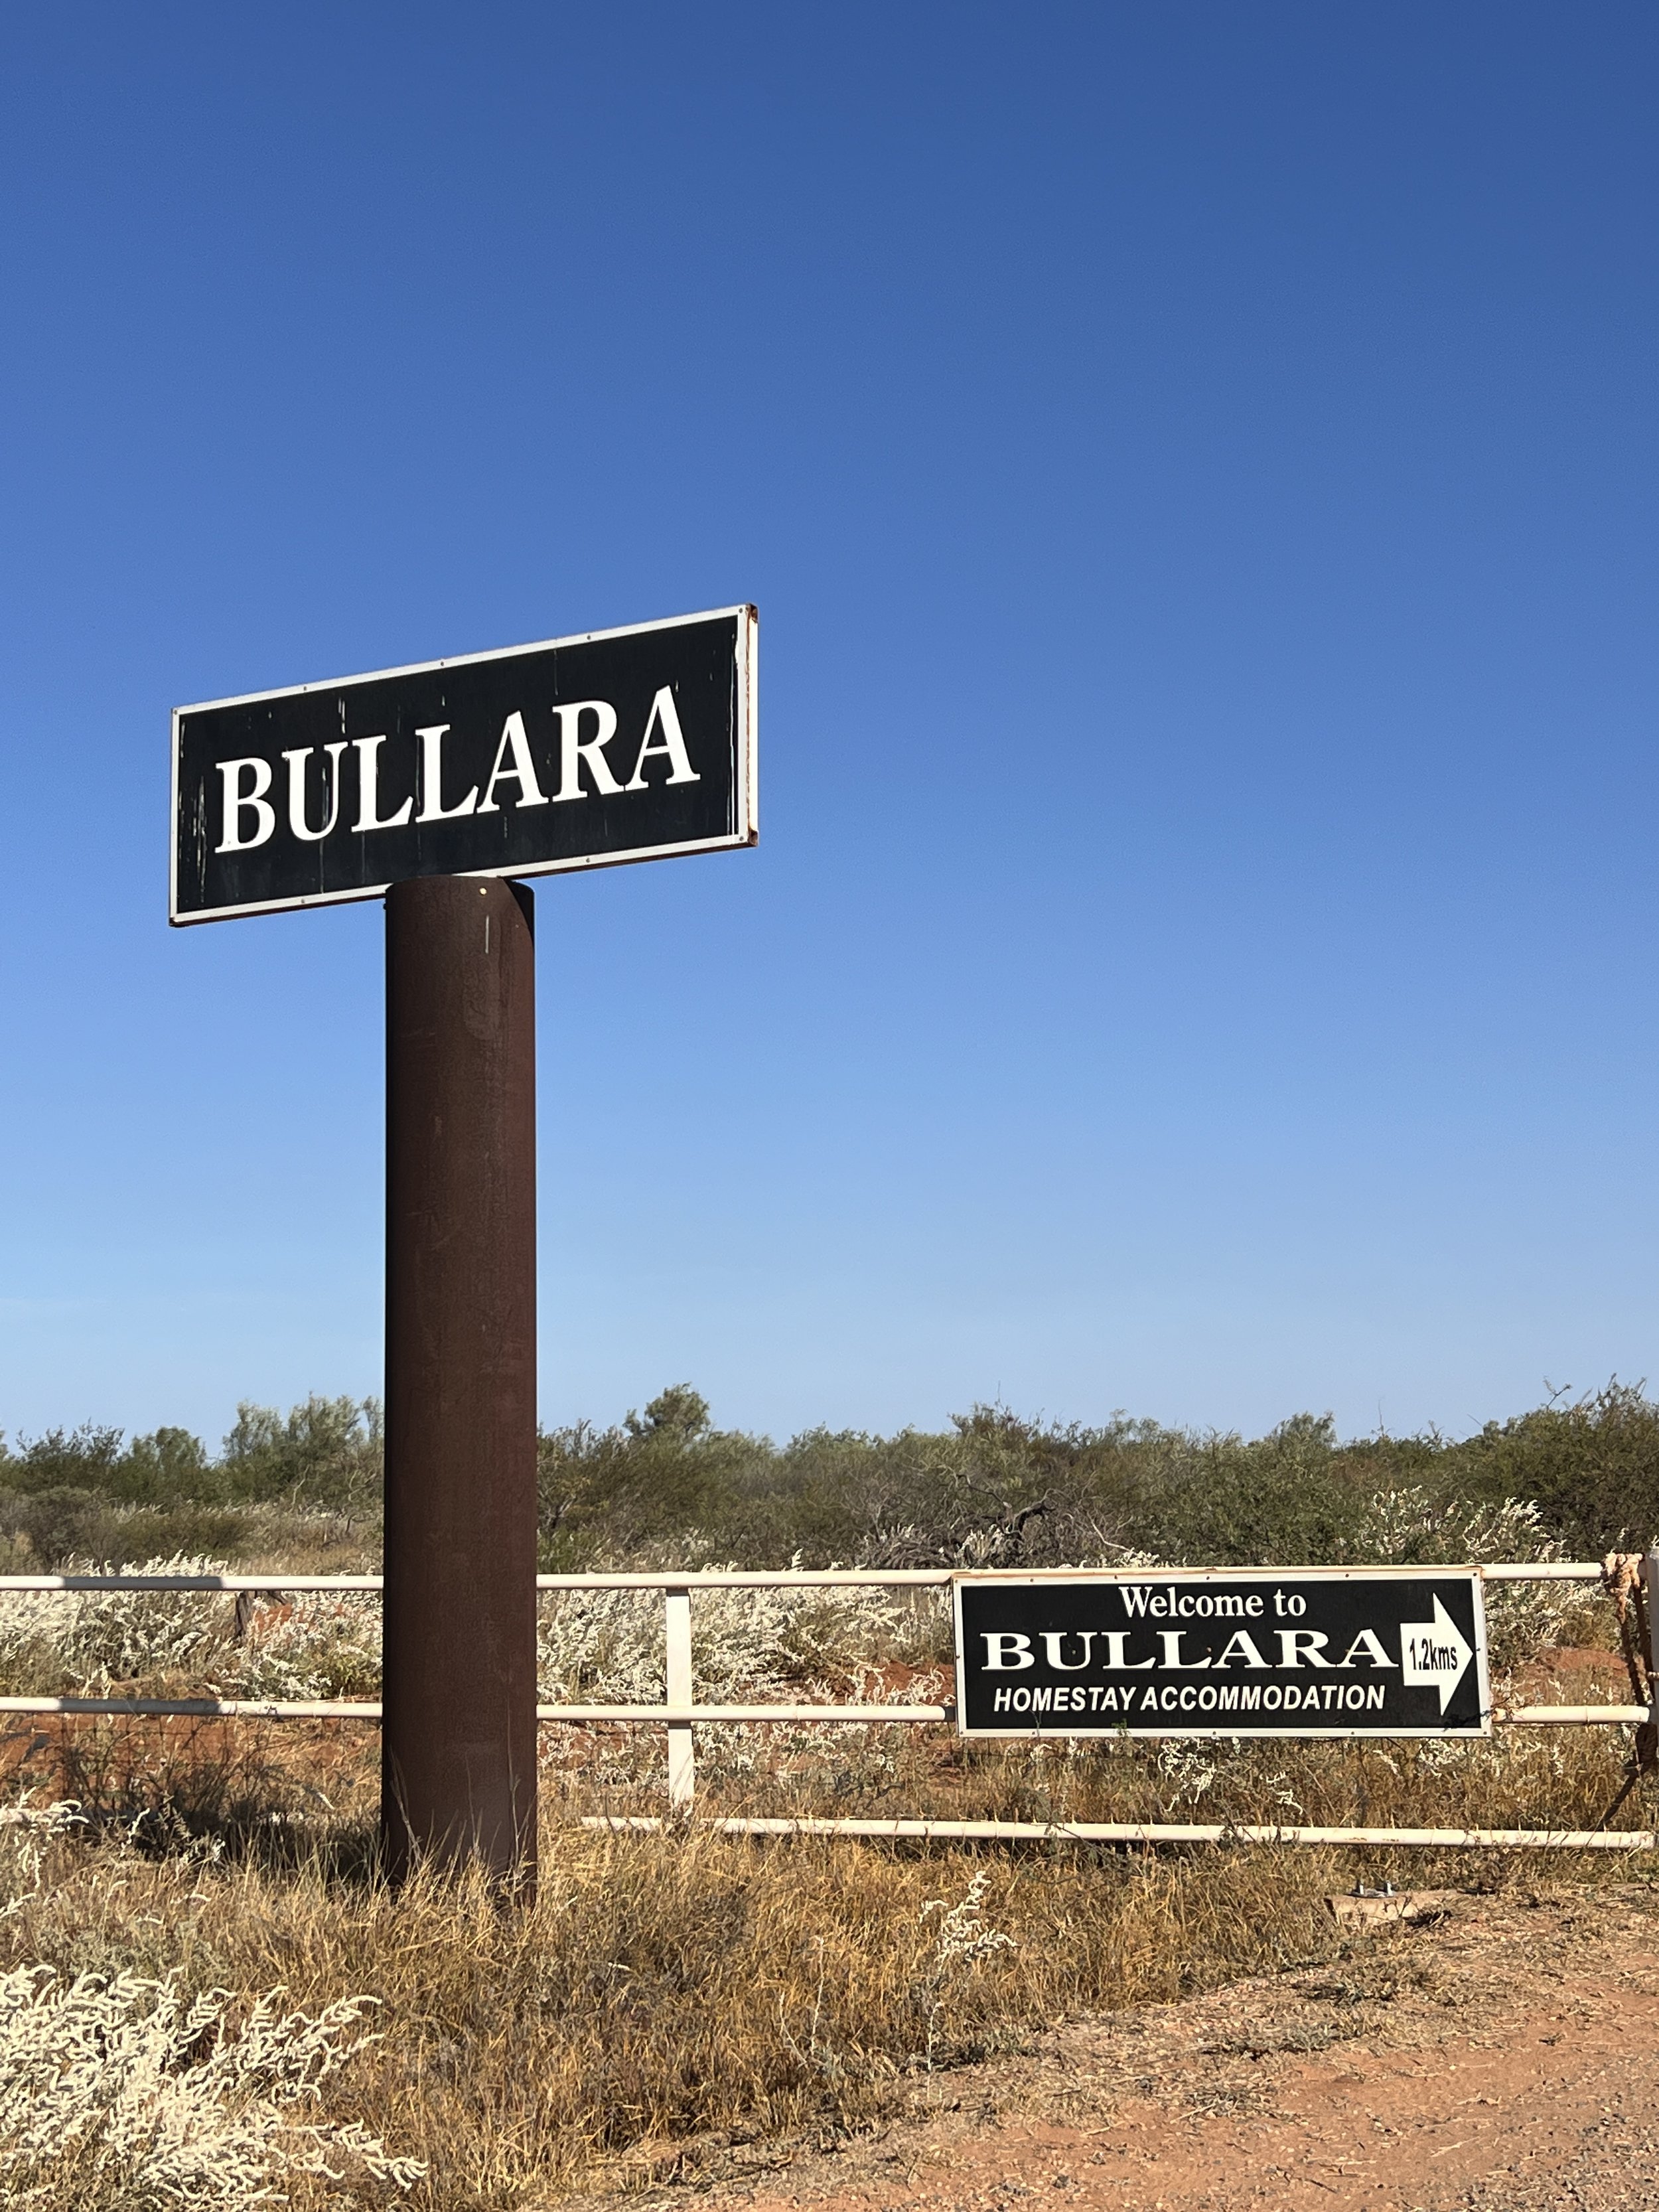 Bullara Cattle Station - about 14 hours north of Perth